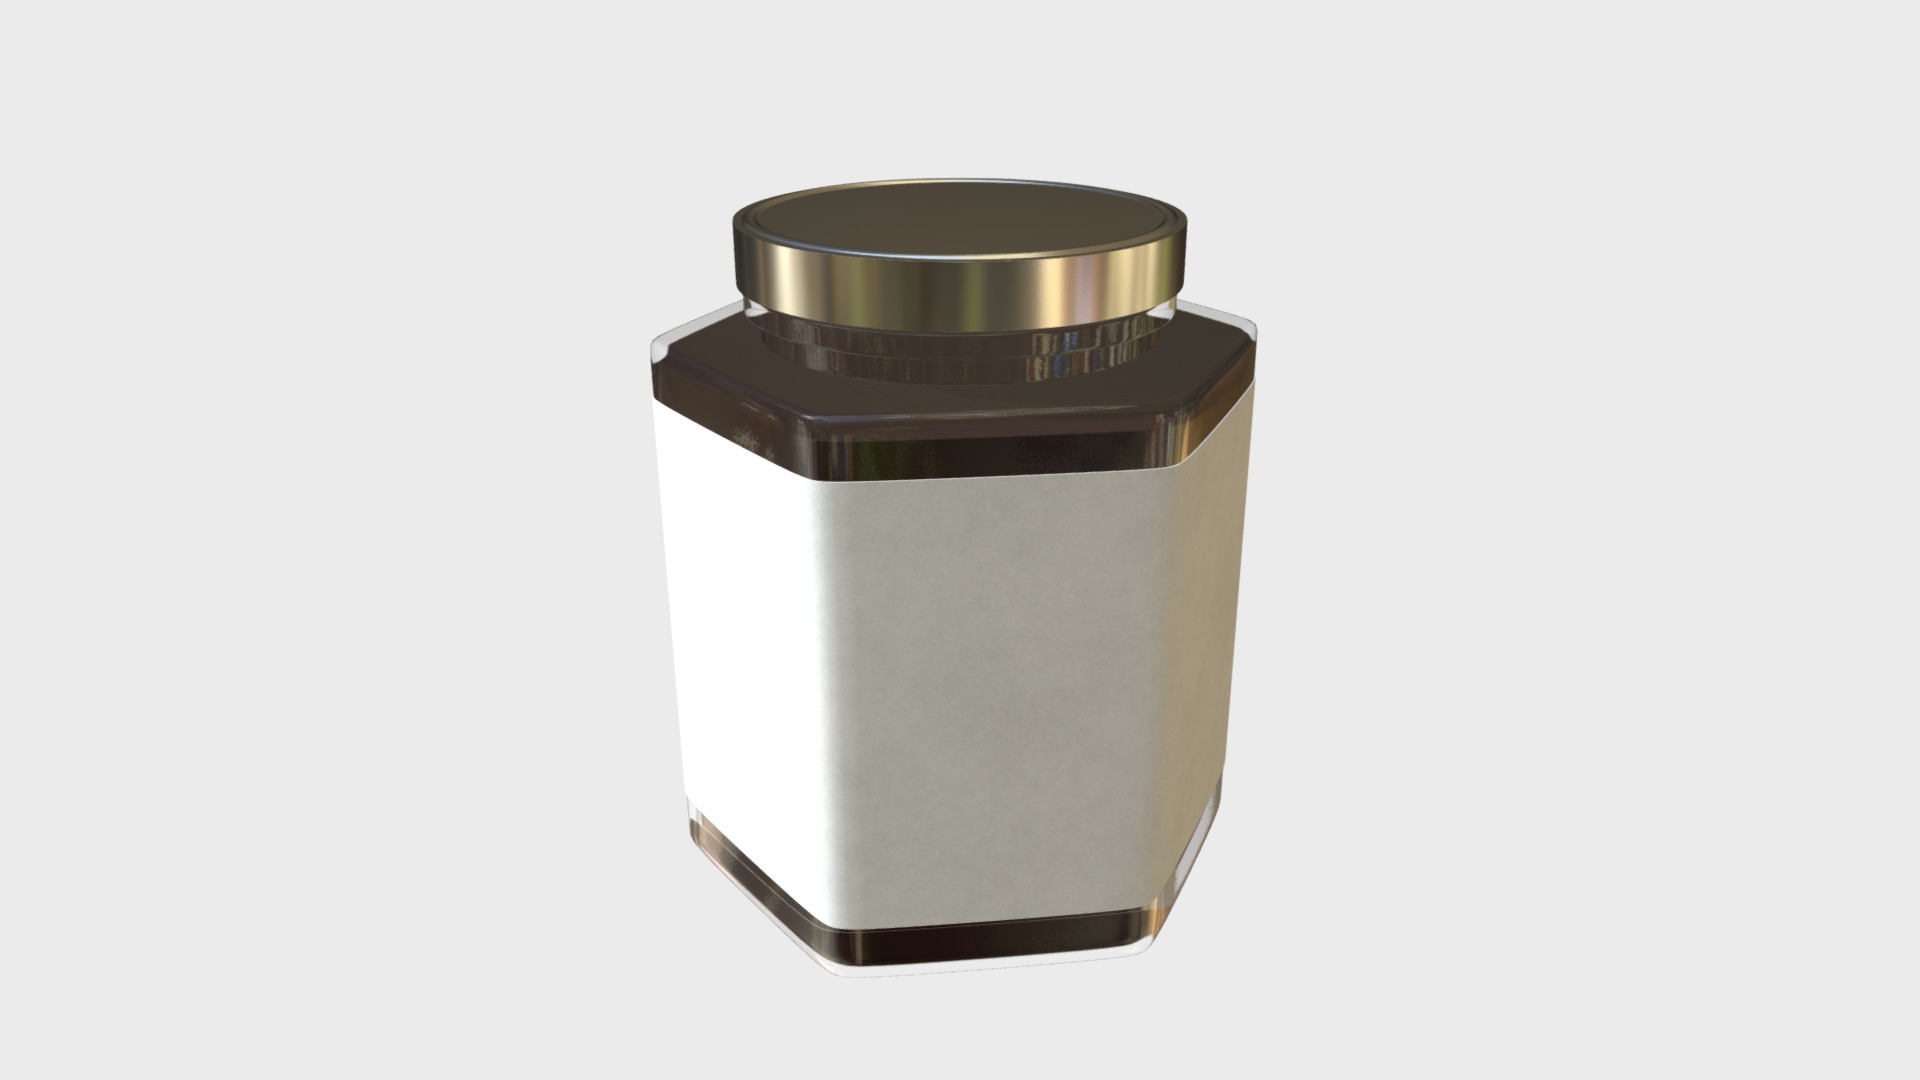 3D model Hexagonal jam jar - This is a 3D model of the Hexagonal jam jar. The 3D model is about a silver cylindrical container.